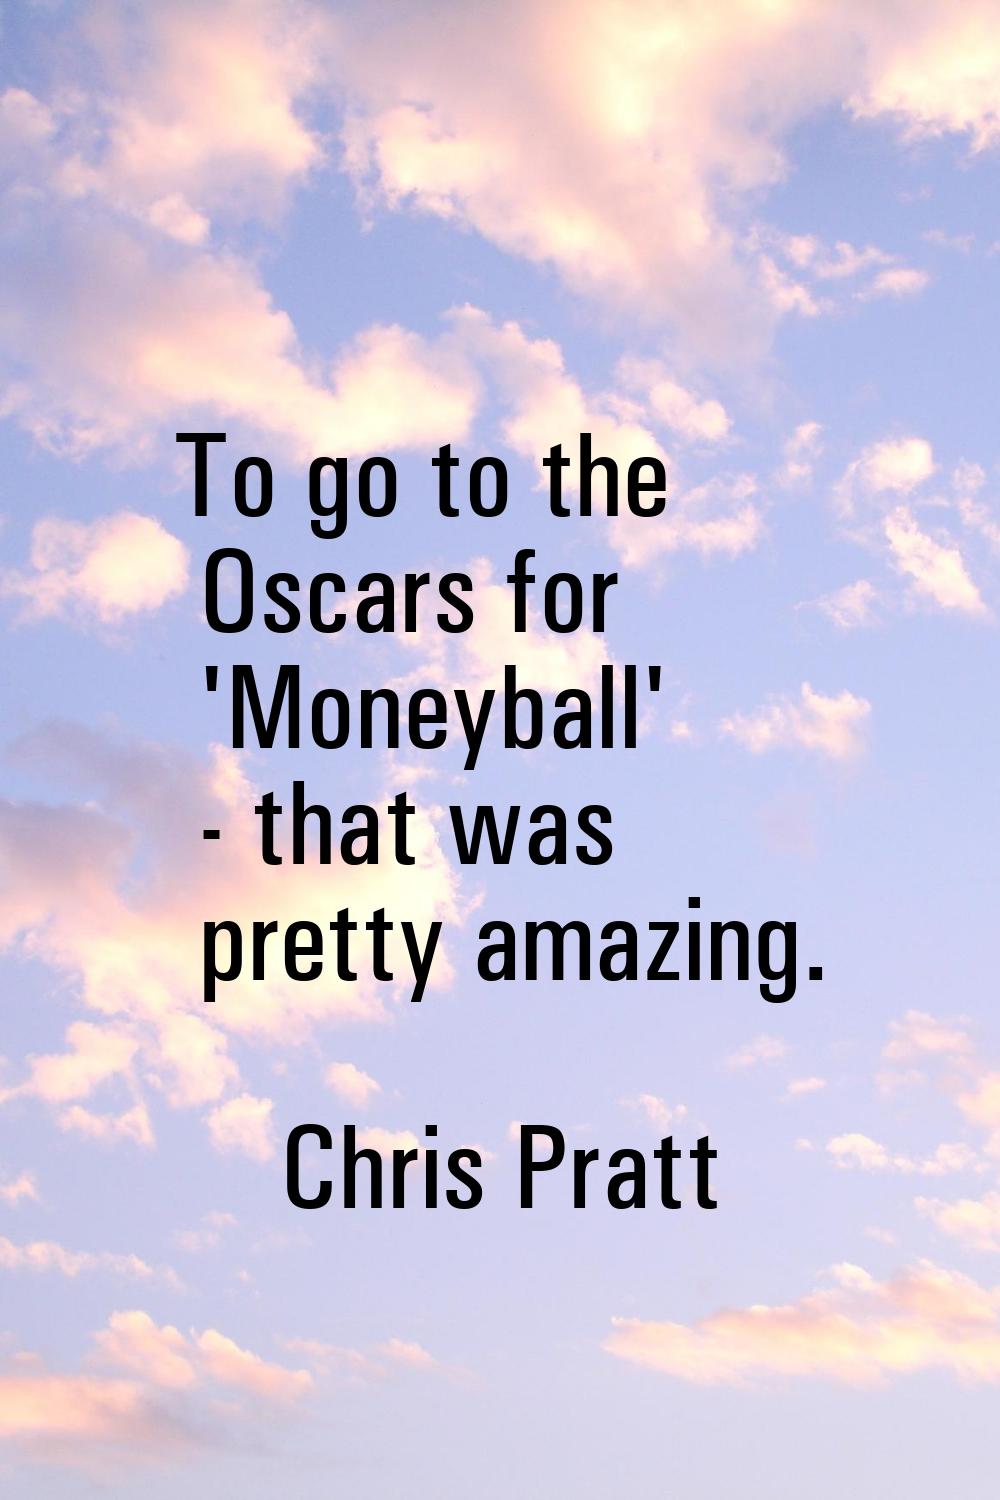 To go to the Oscars for 'Moneyball' - that was pretty amazing.